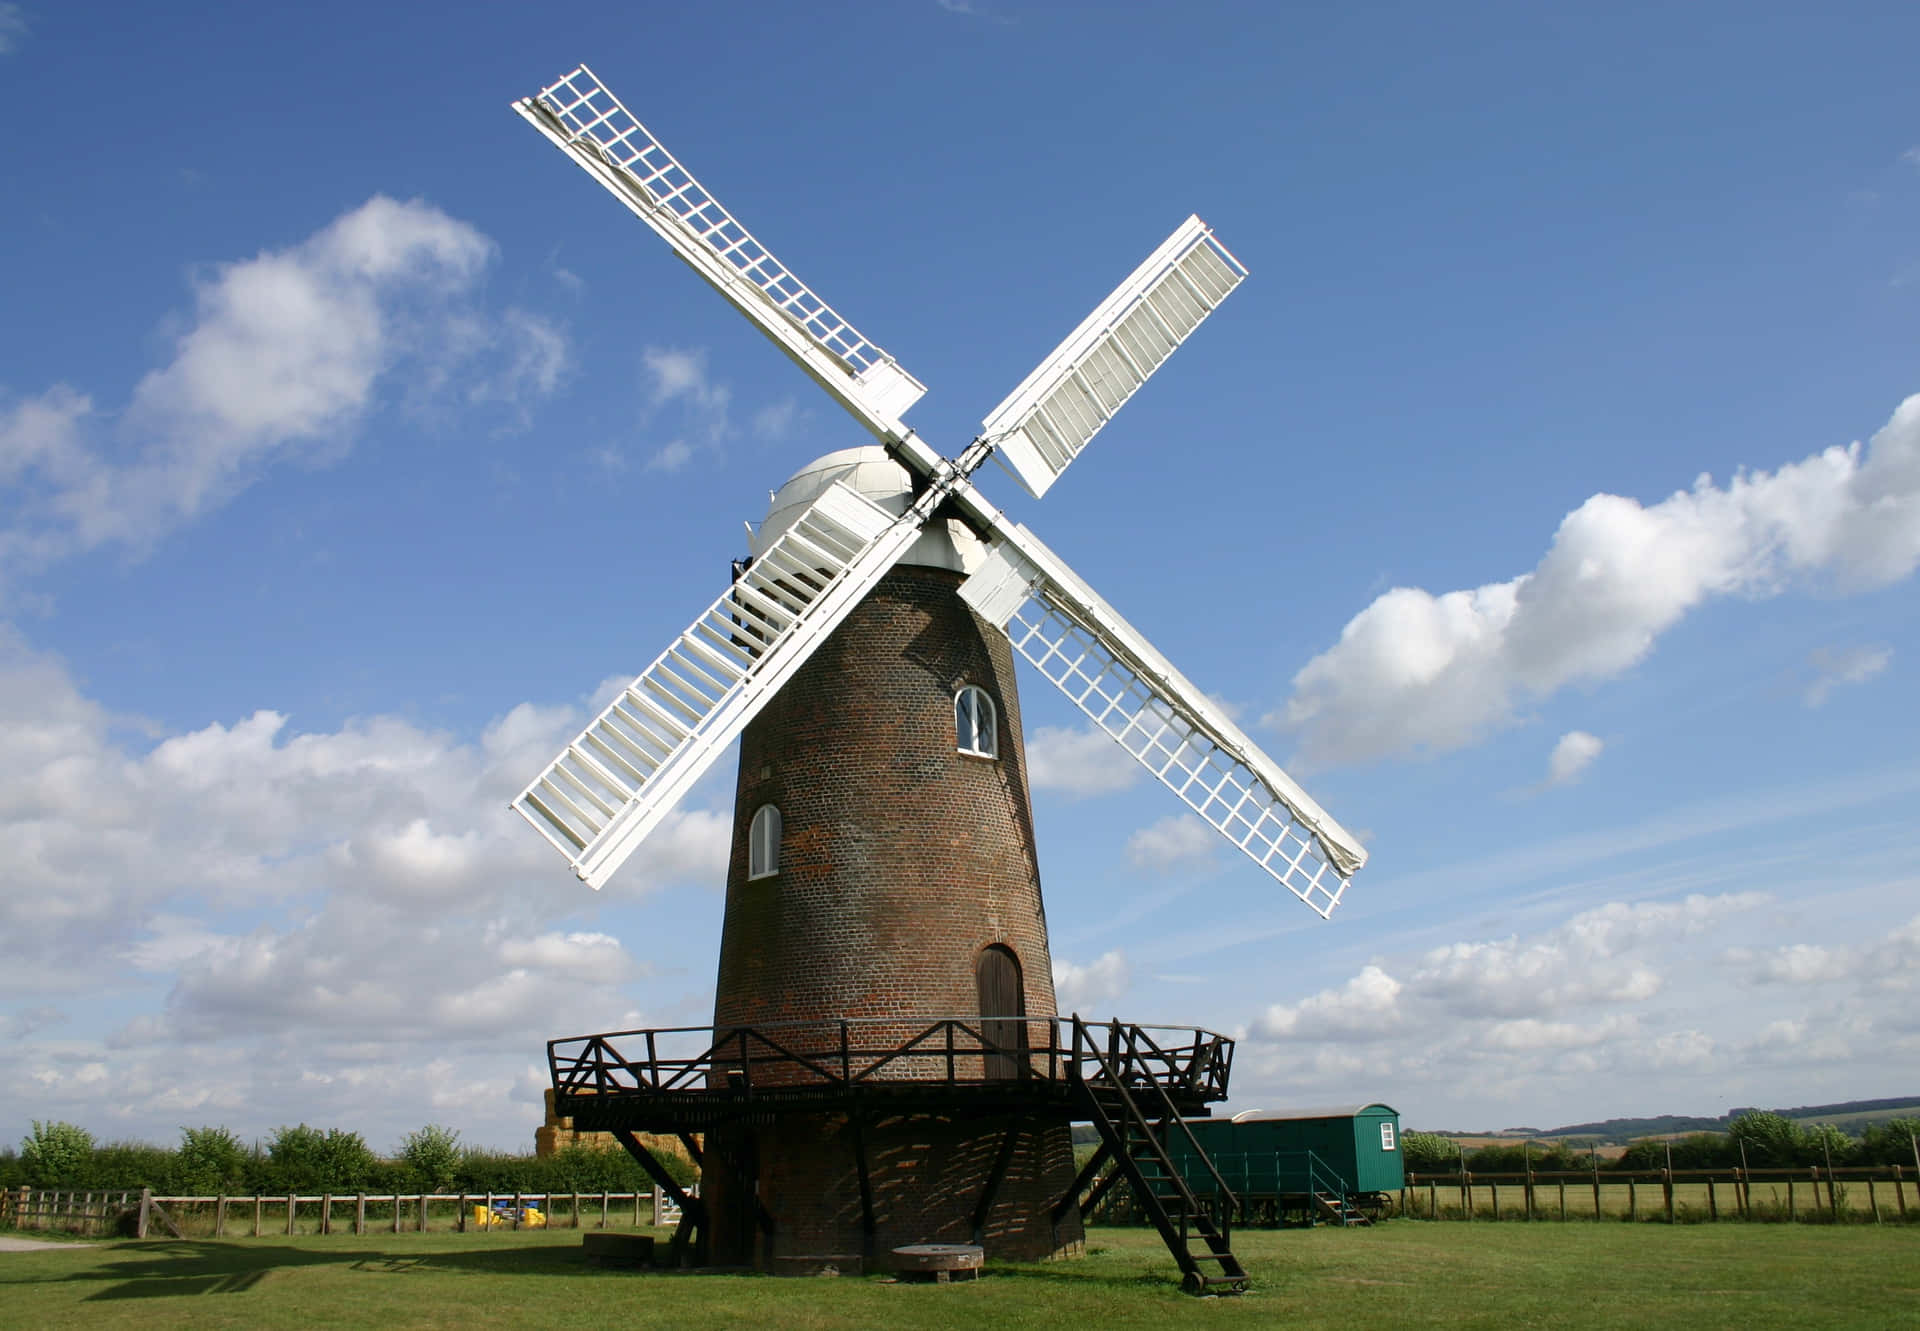 A beautiful windmill in the country